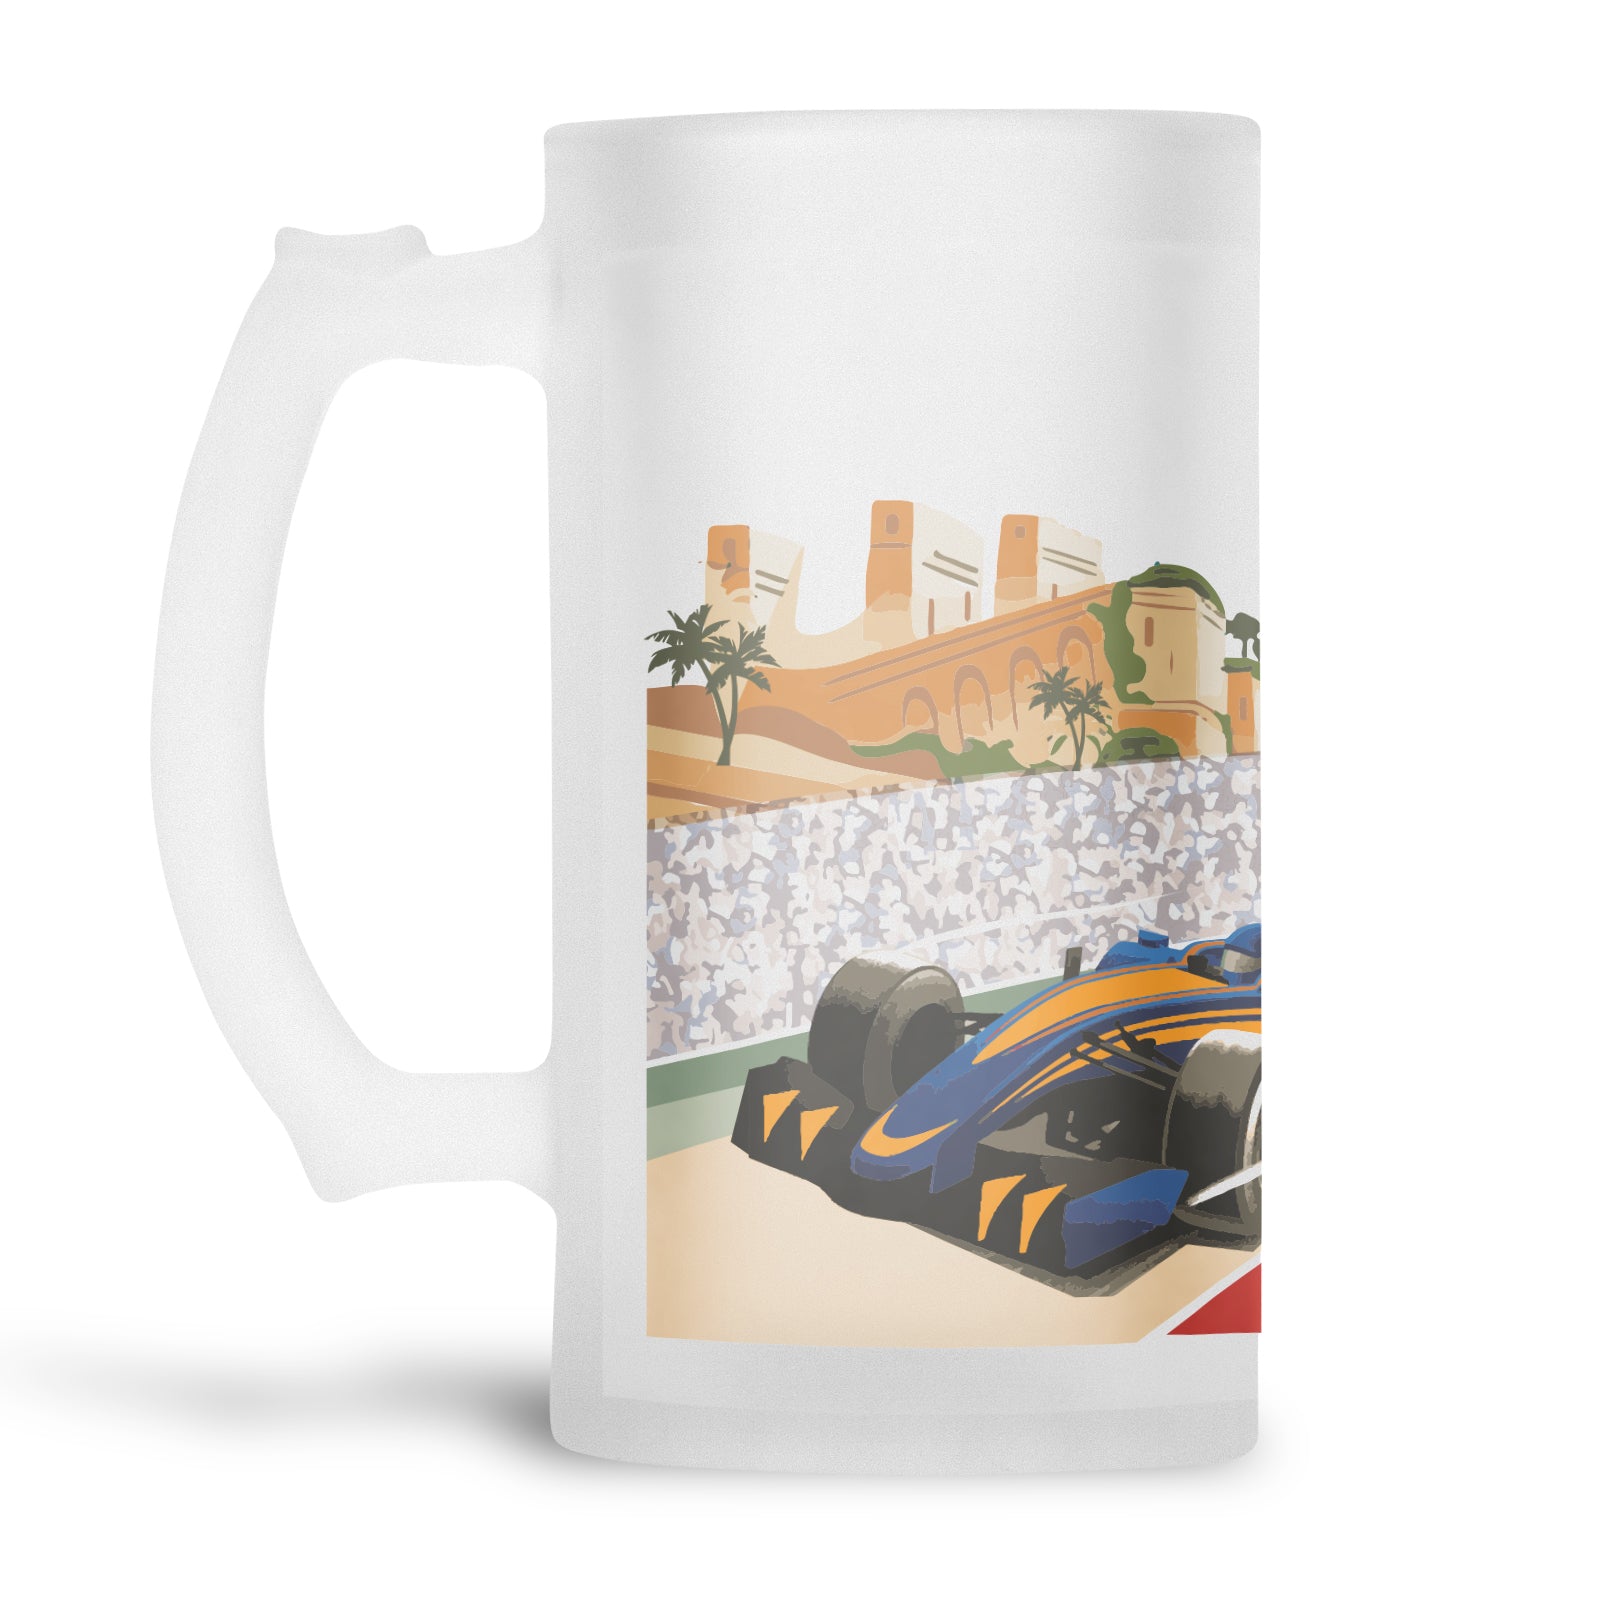 Frosted glass beer stein with an image of F1 Motor racing. Palm trees, buildings and a croud in the background.